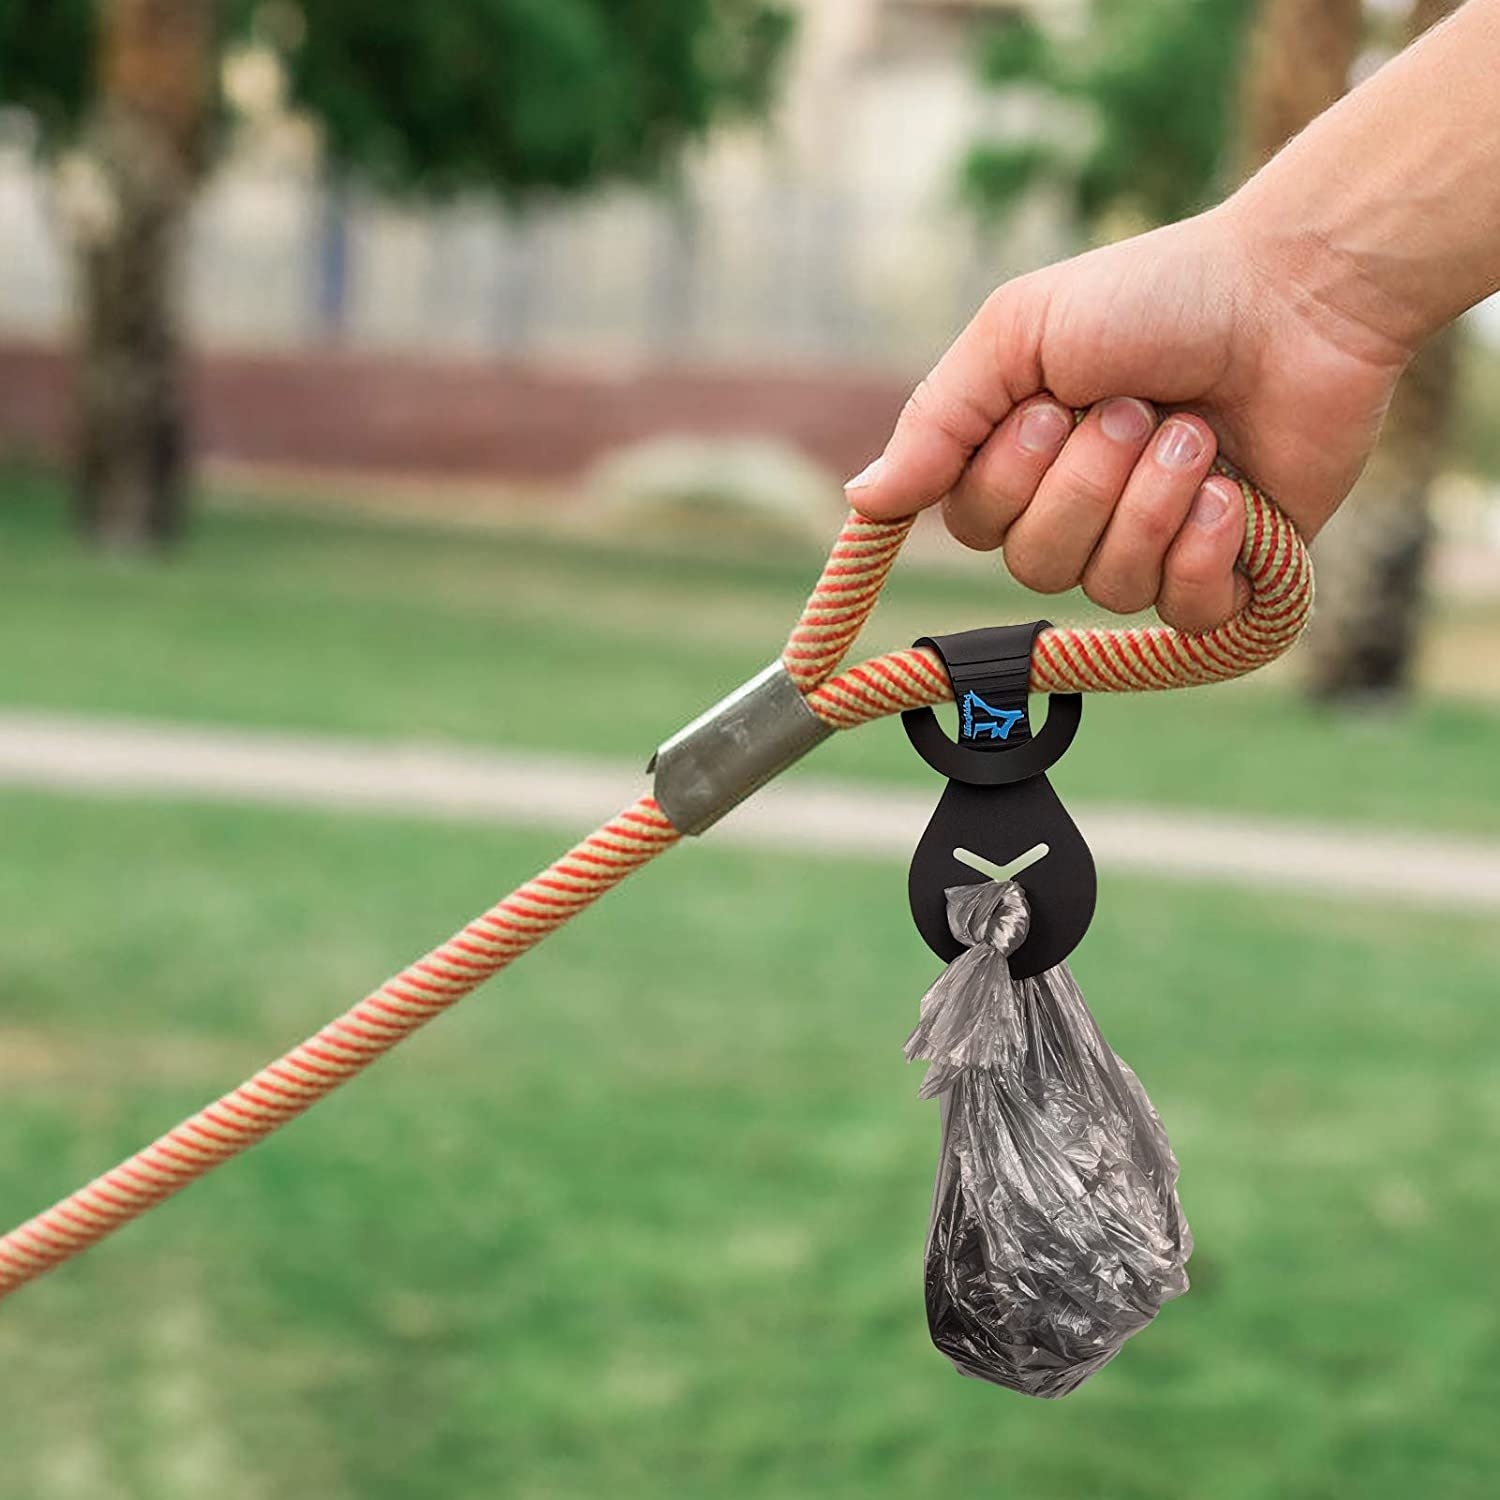 The bag carrier holding a poop bag on a leash